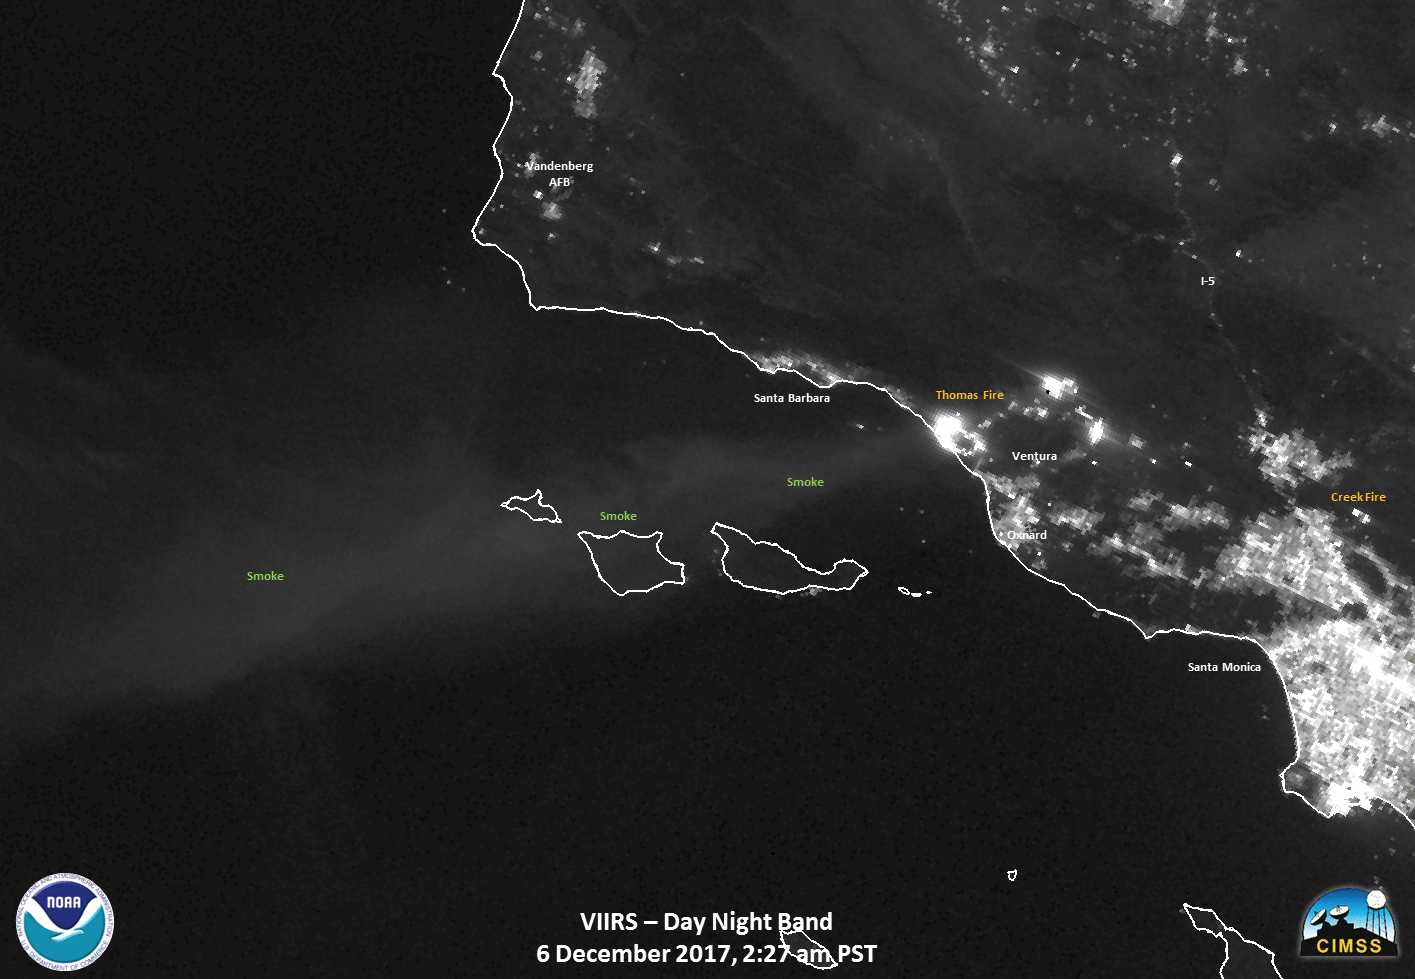 Suomi NPP VIIRS Day/Night Band (0.7 µm) and Shortwave Infrared (3.75 µm and 4.05 µm) images [click to enlarge]